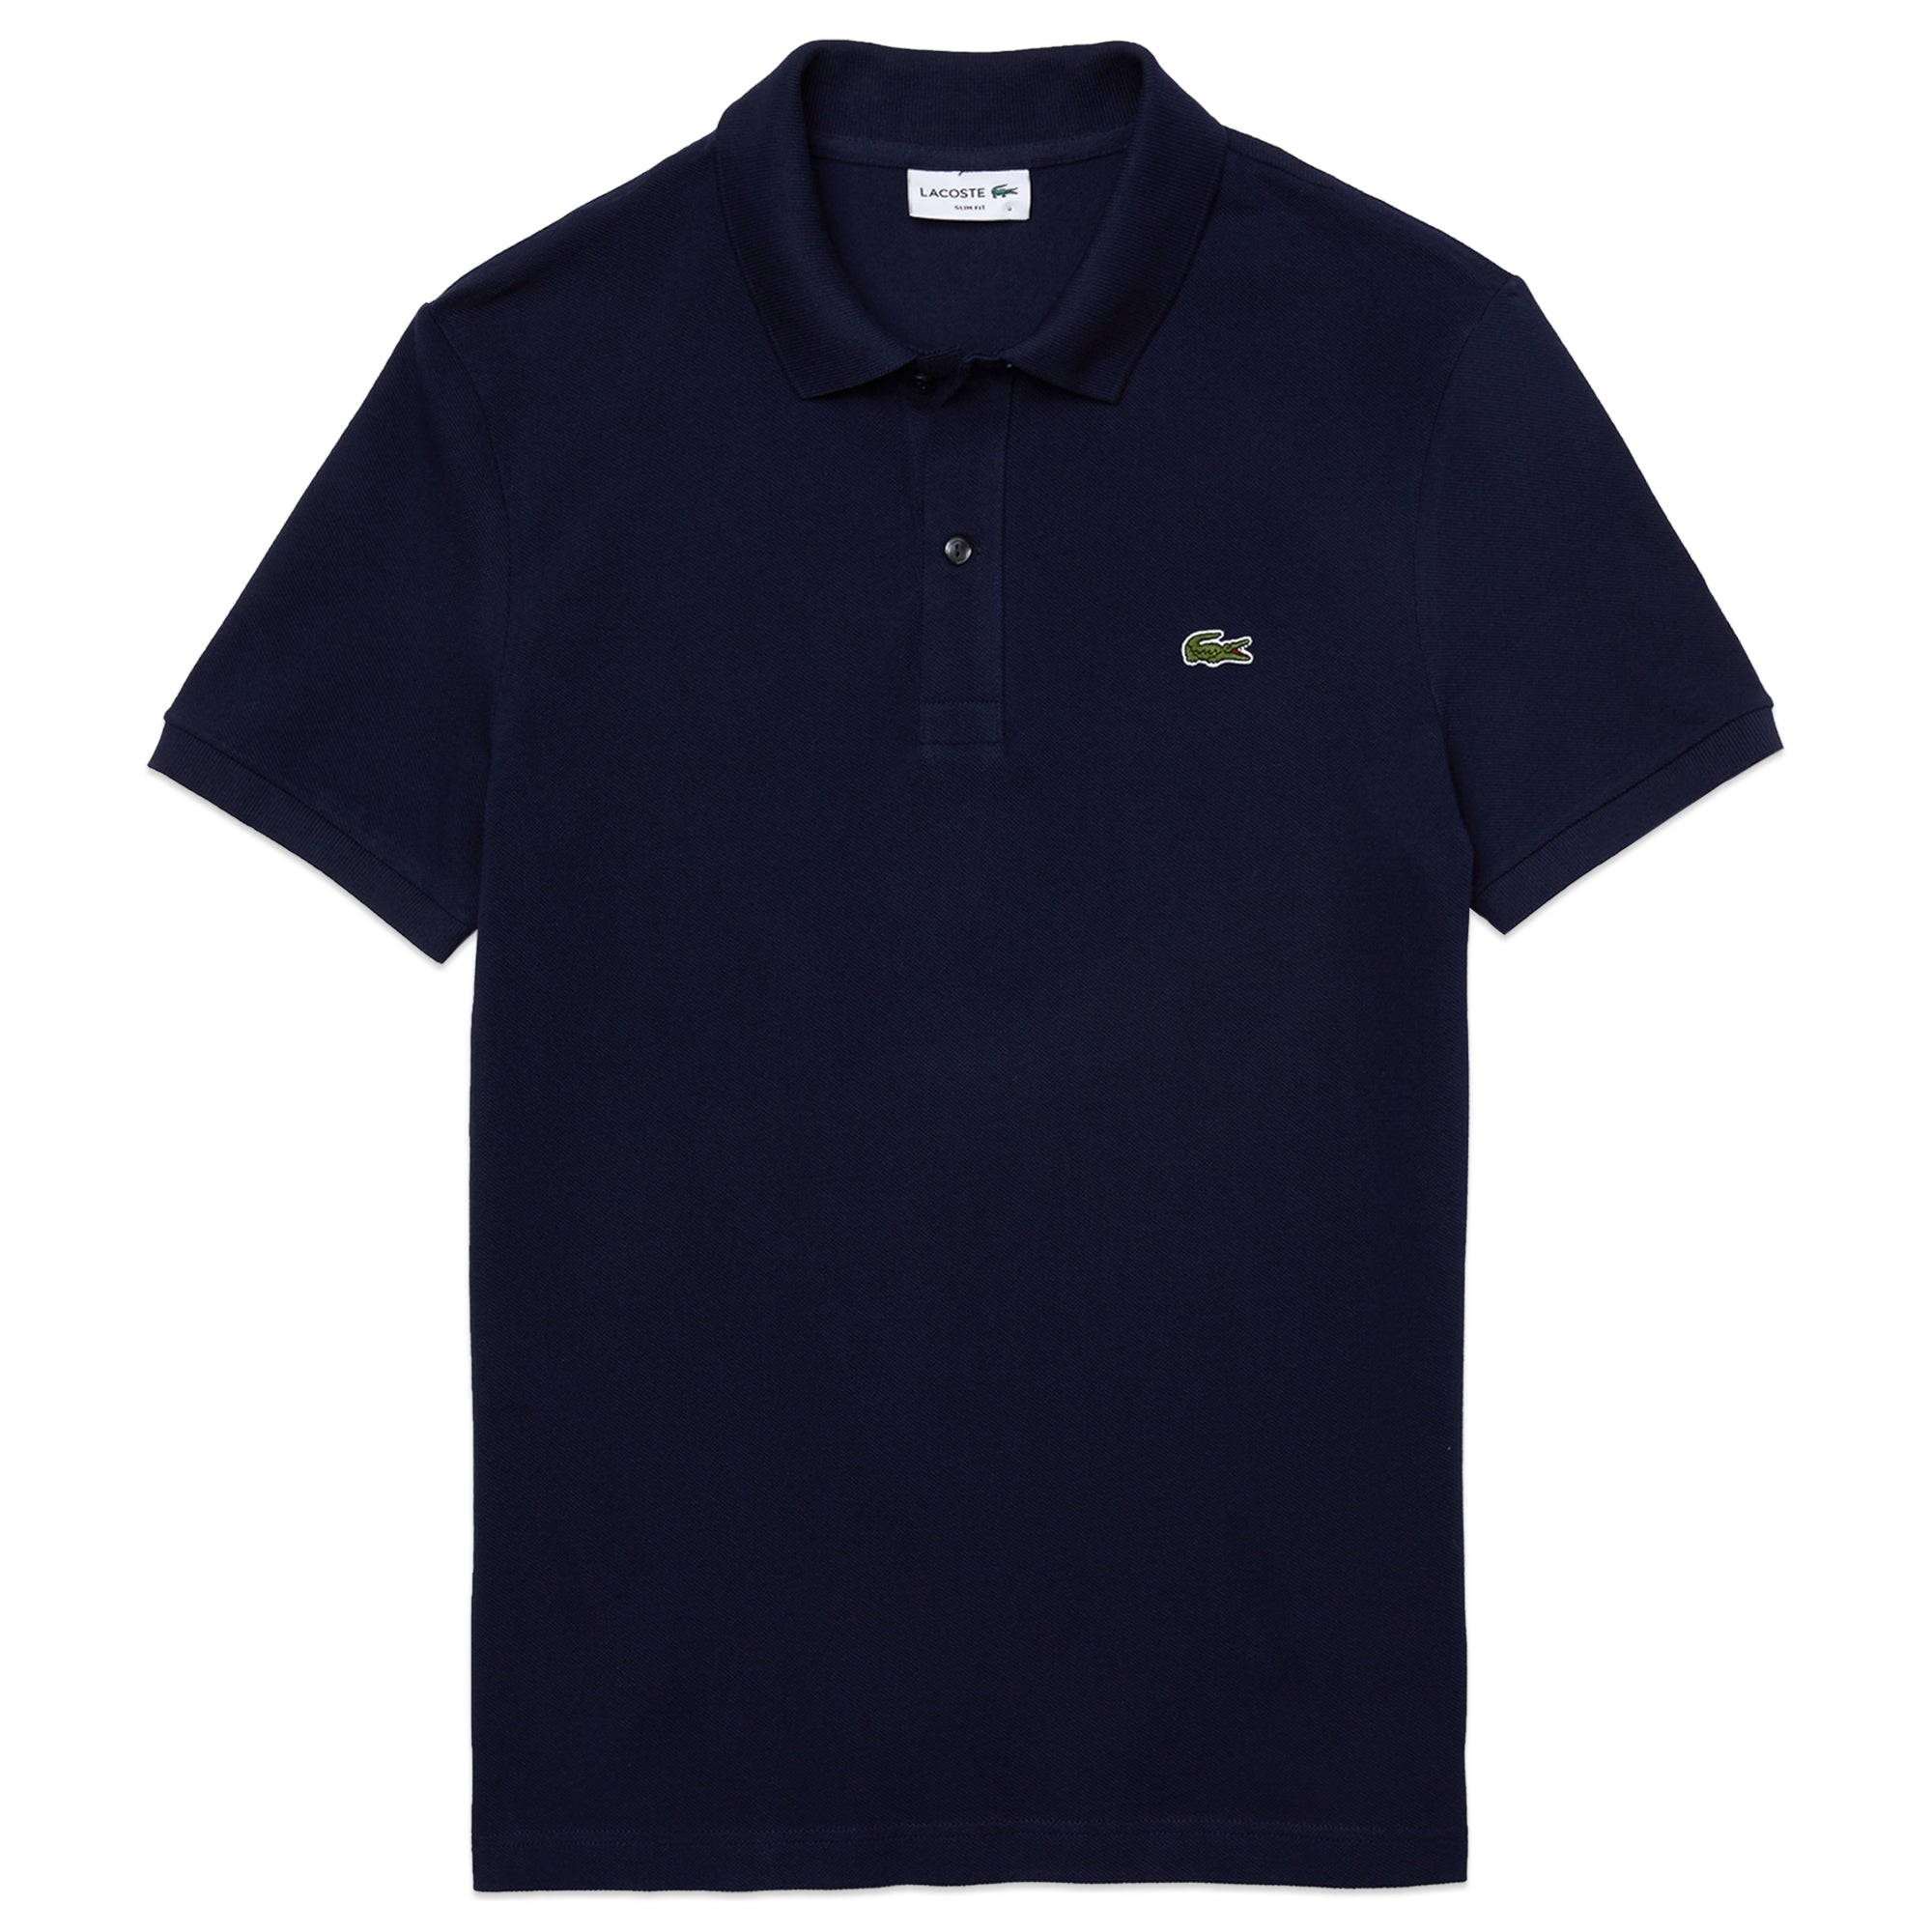 Lacoste Short Sleeved Slim Fit Polo PH4012 - Navy